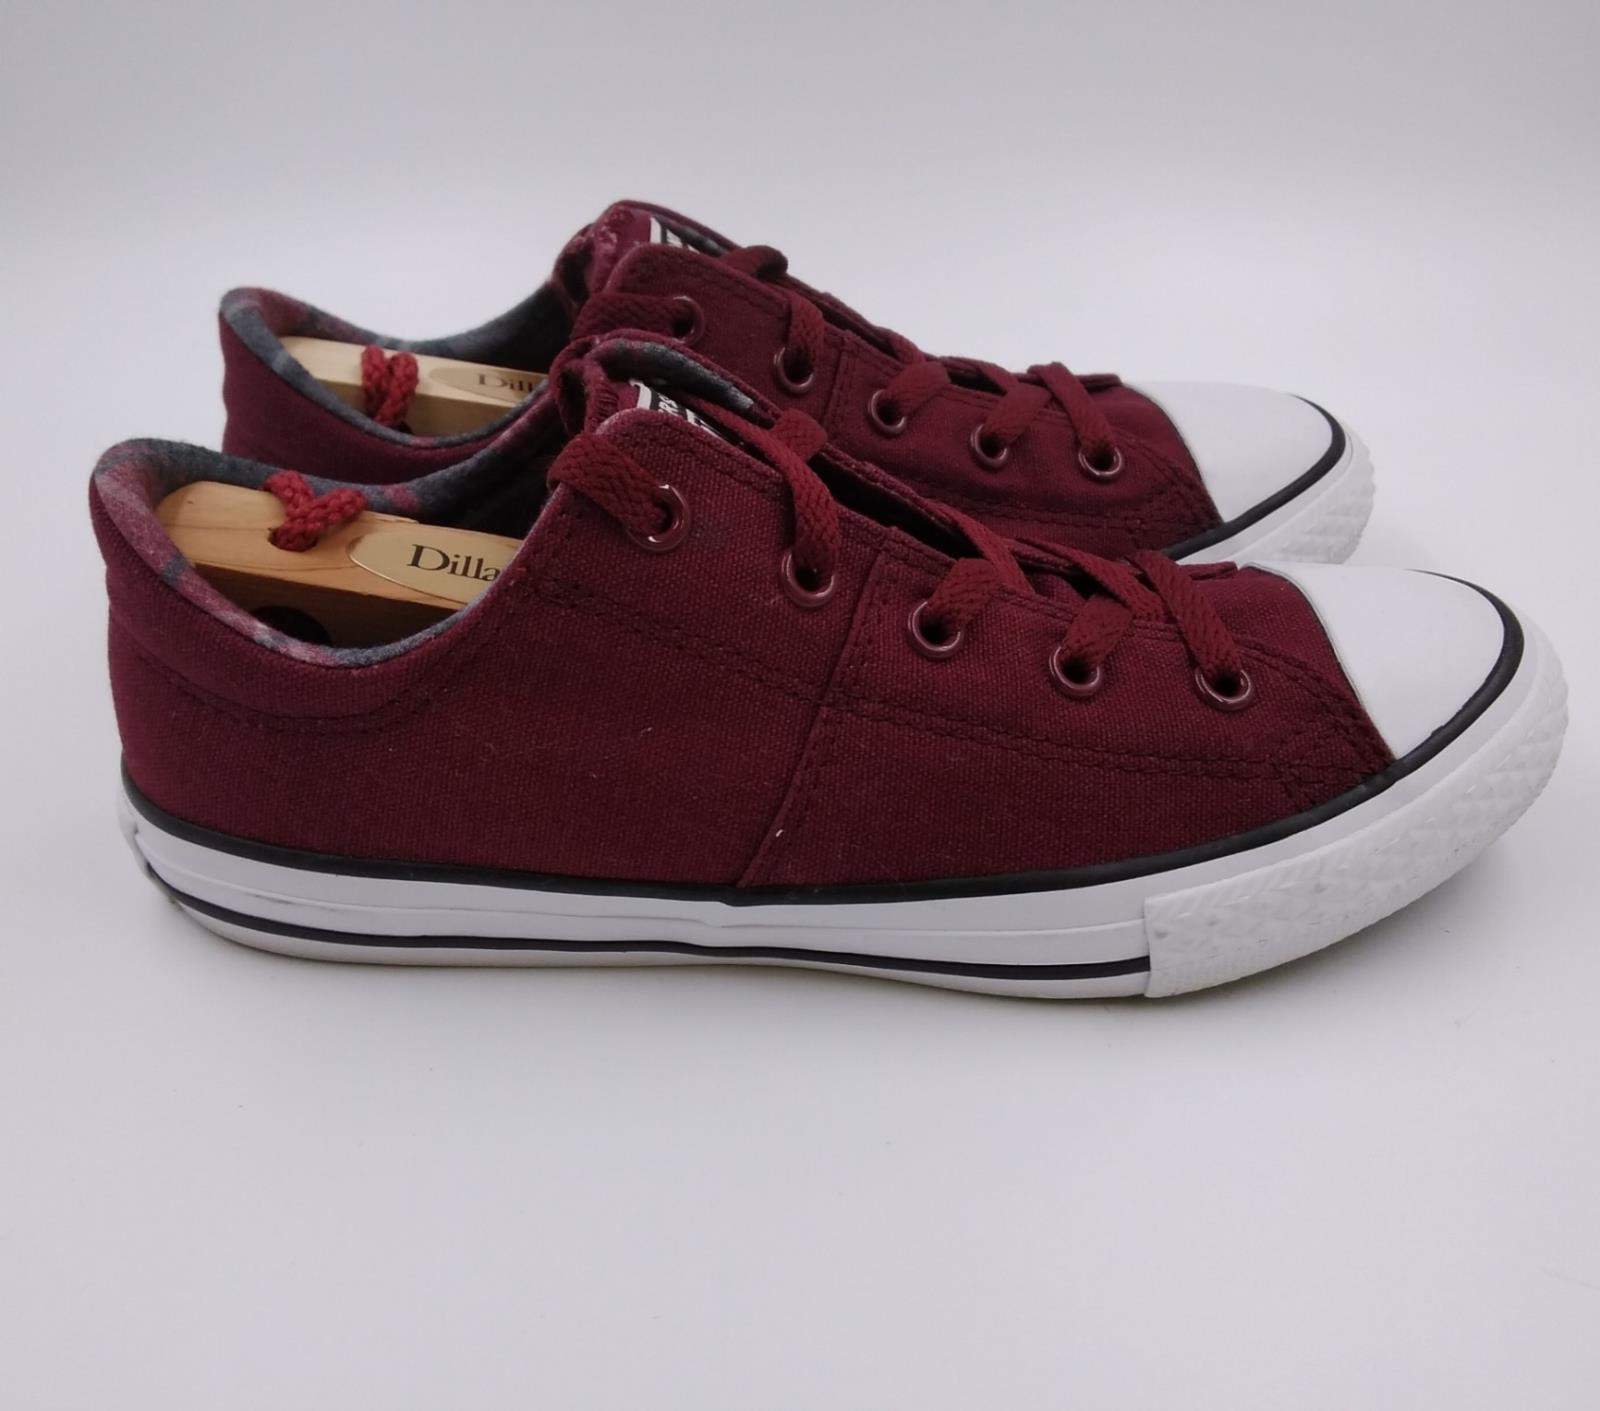 Converse Girls Maroon Chuck Taylor All Star Lace Up Low Top Sneaker ...